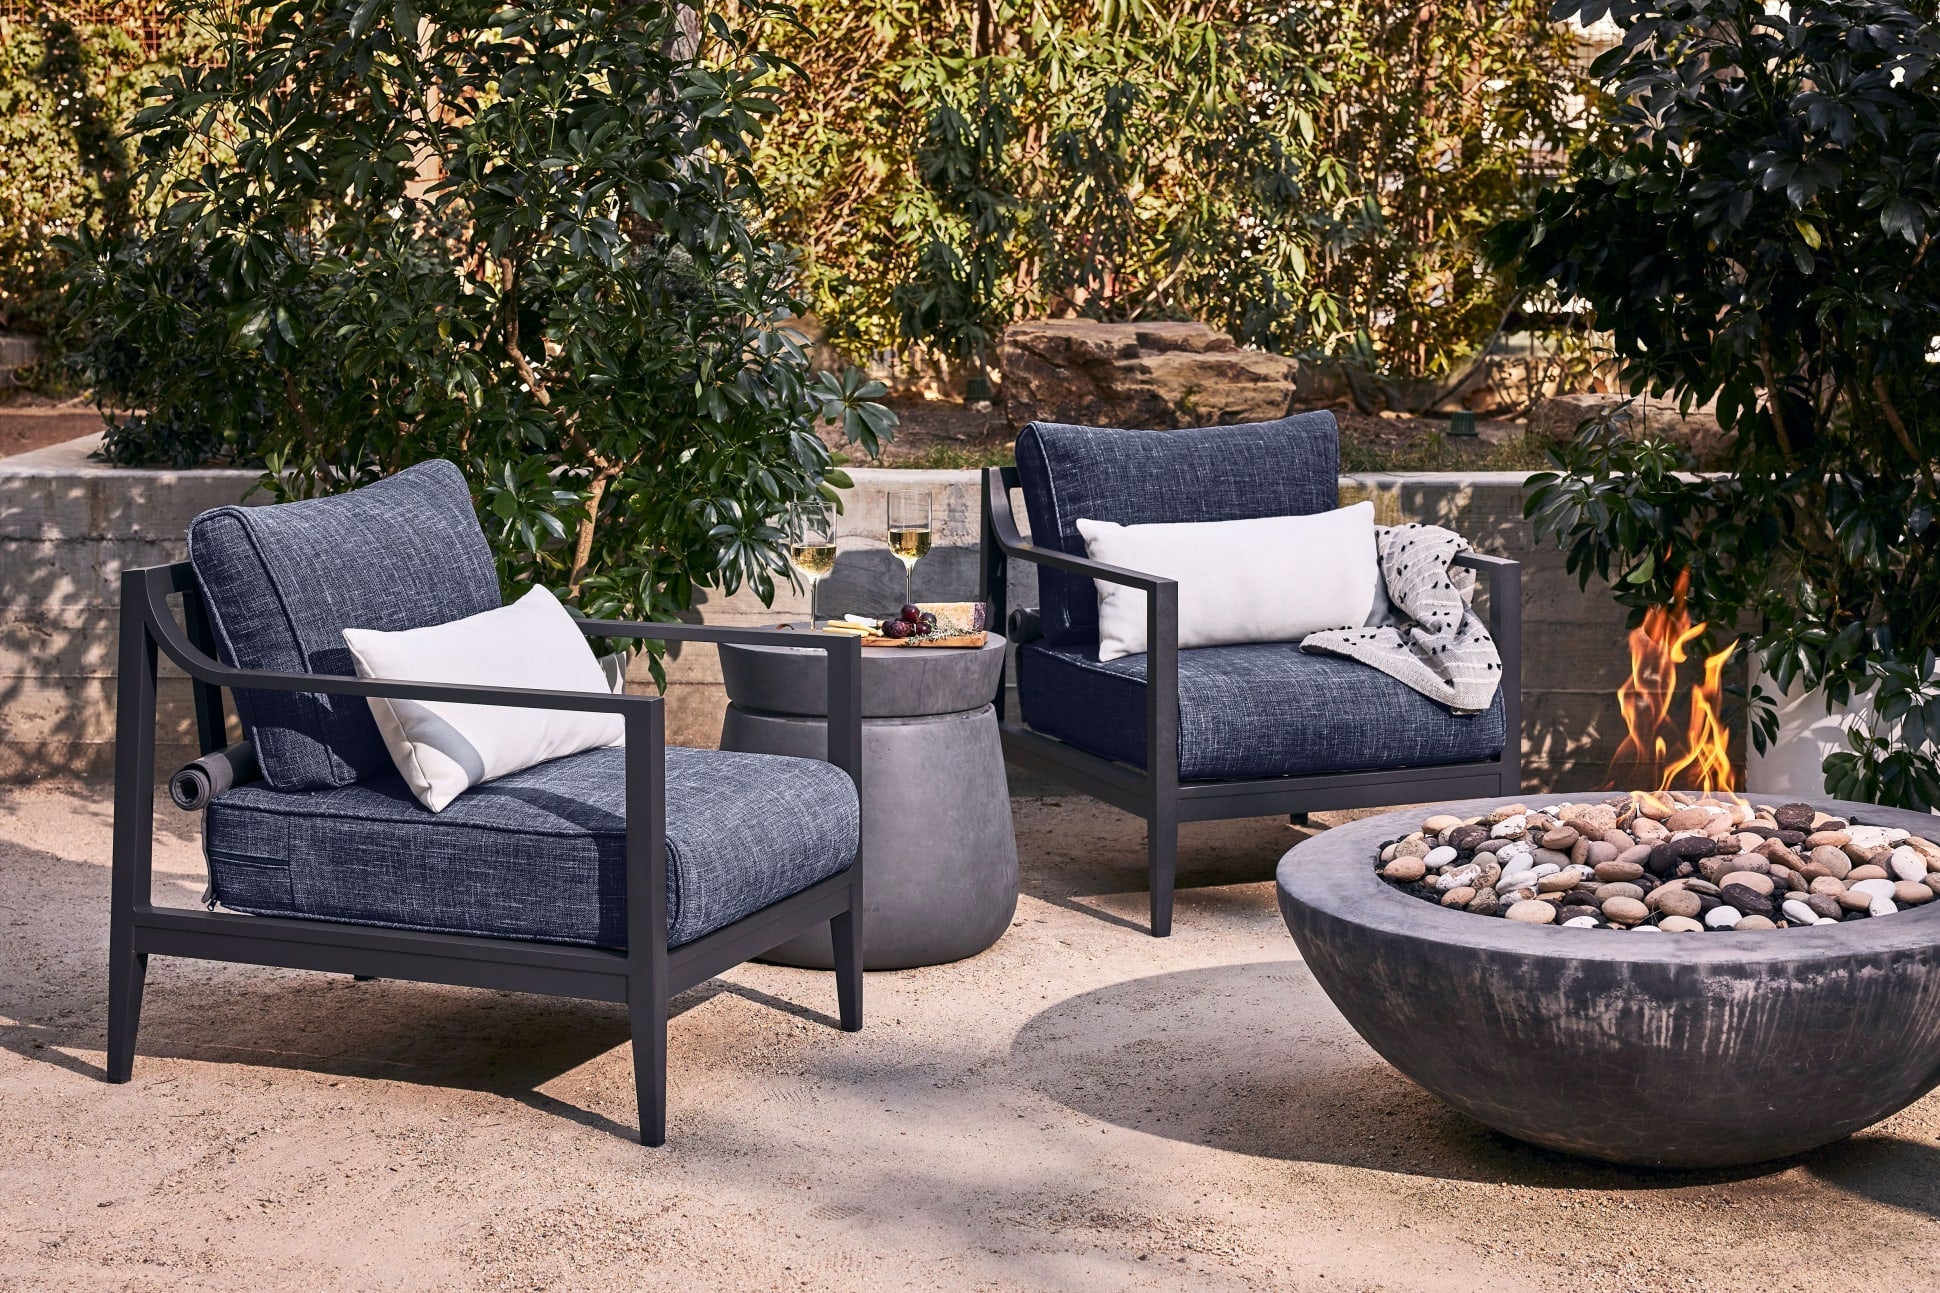 Live Outer 29" Charcoal Aluminum Outdoor Armless Chair Conversation Set With Deep Sea Navy Cushion